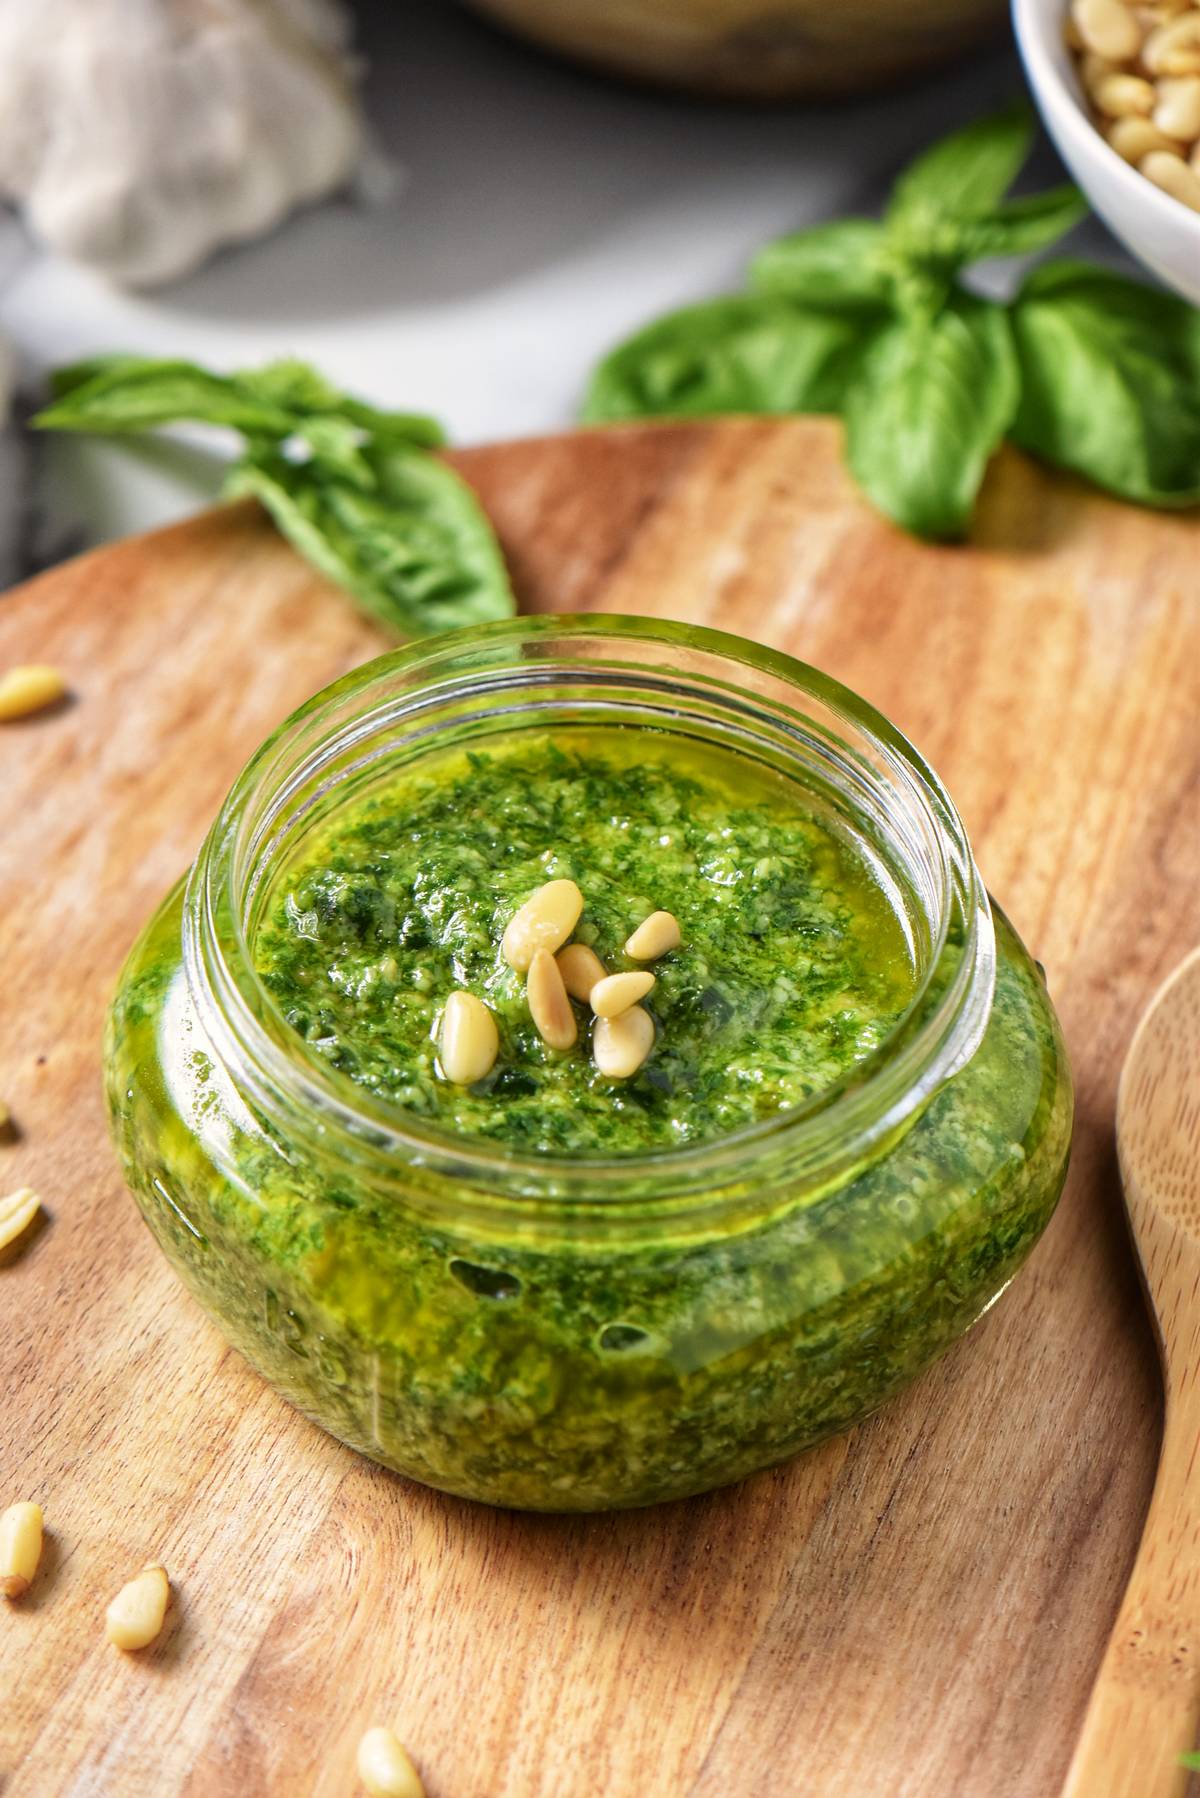 A freshly made jar of basil pesto sauce, topped with a few pine nuts and a layer of olive oil.